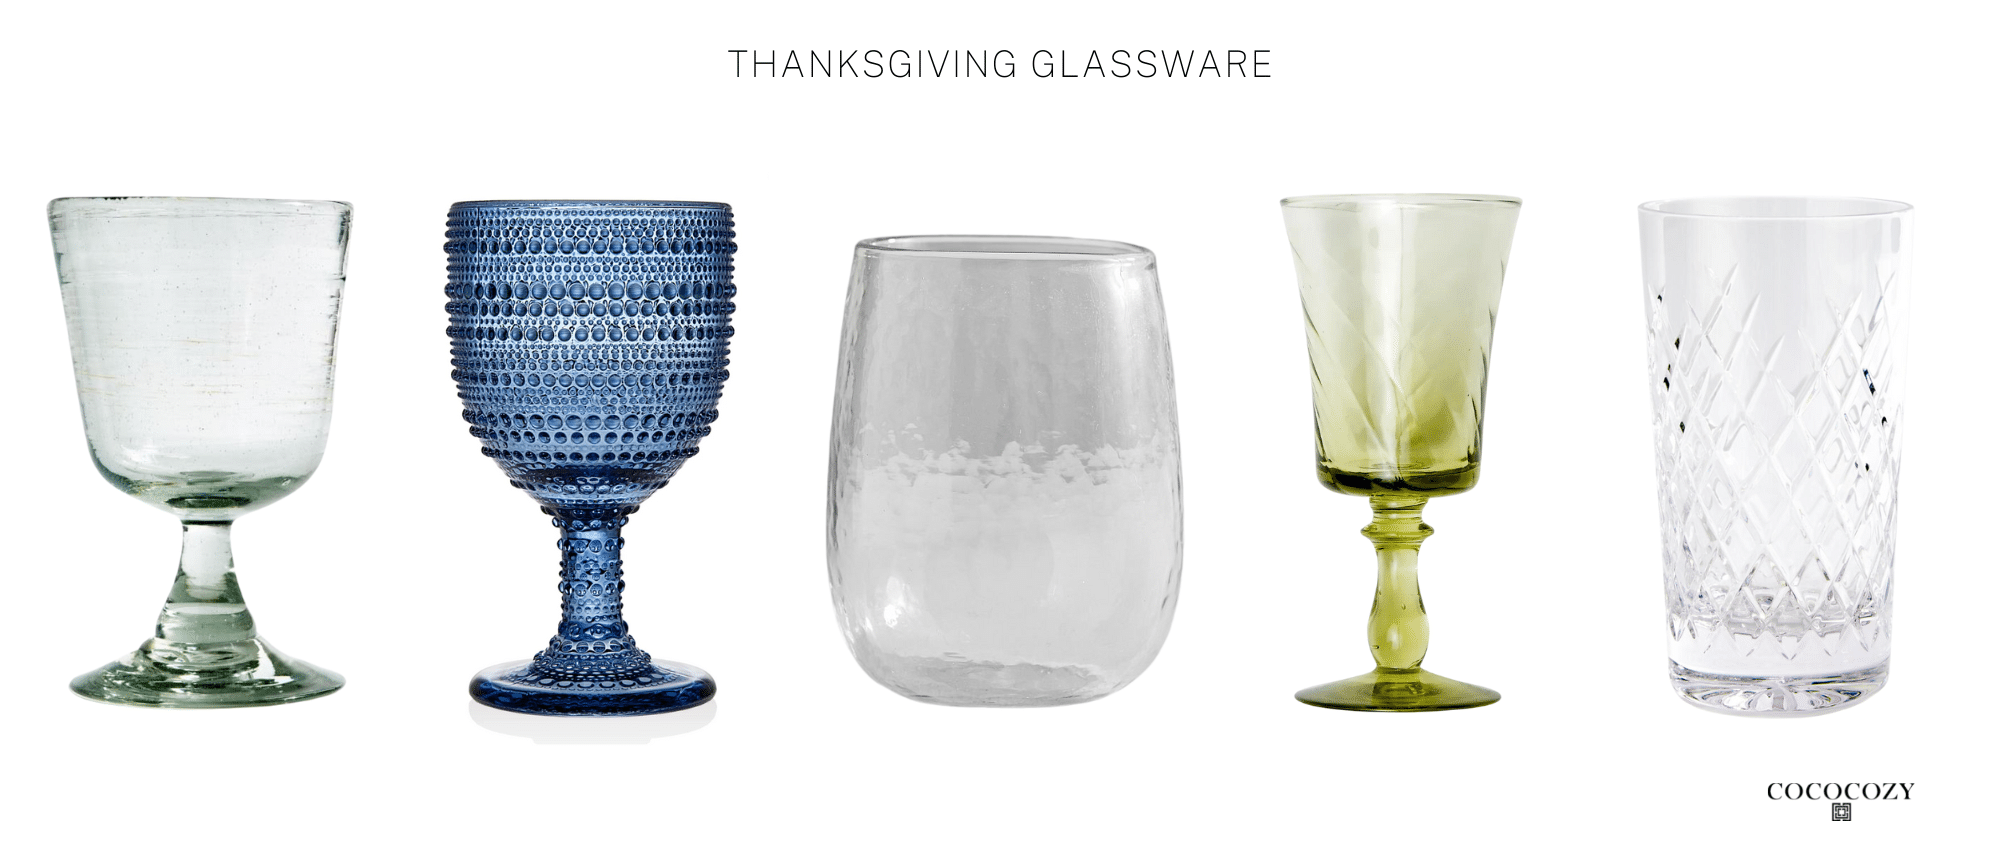 Alt tag for glassware-thanksgiving-goblets-tablescape-bloomingdale's-cococozy